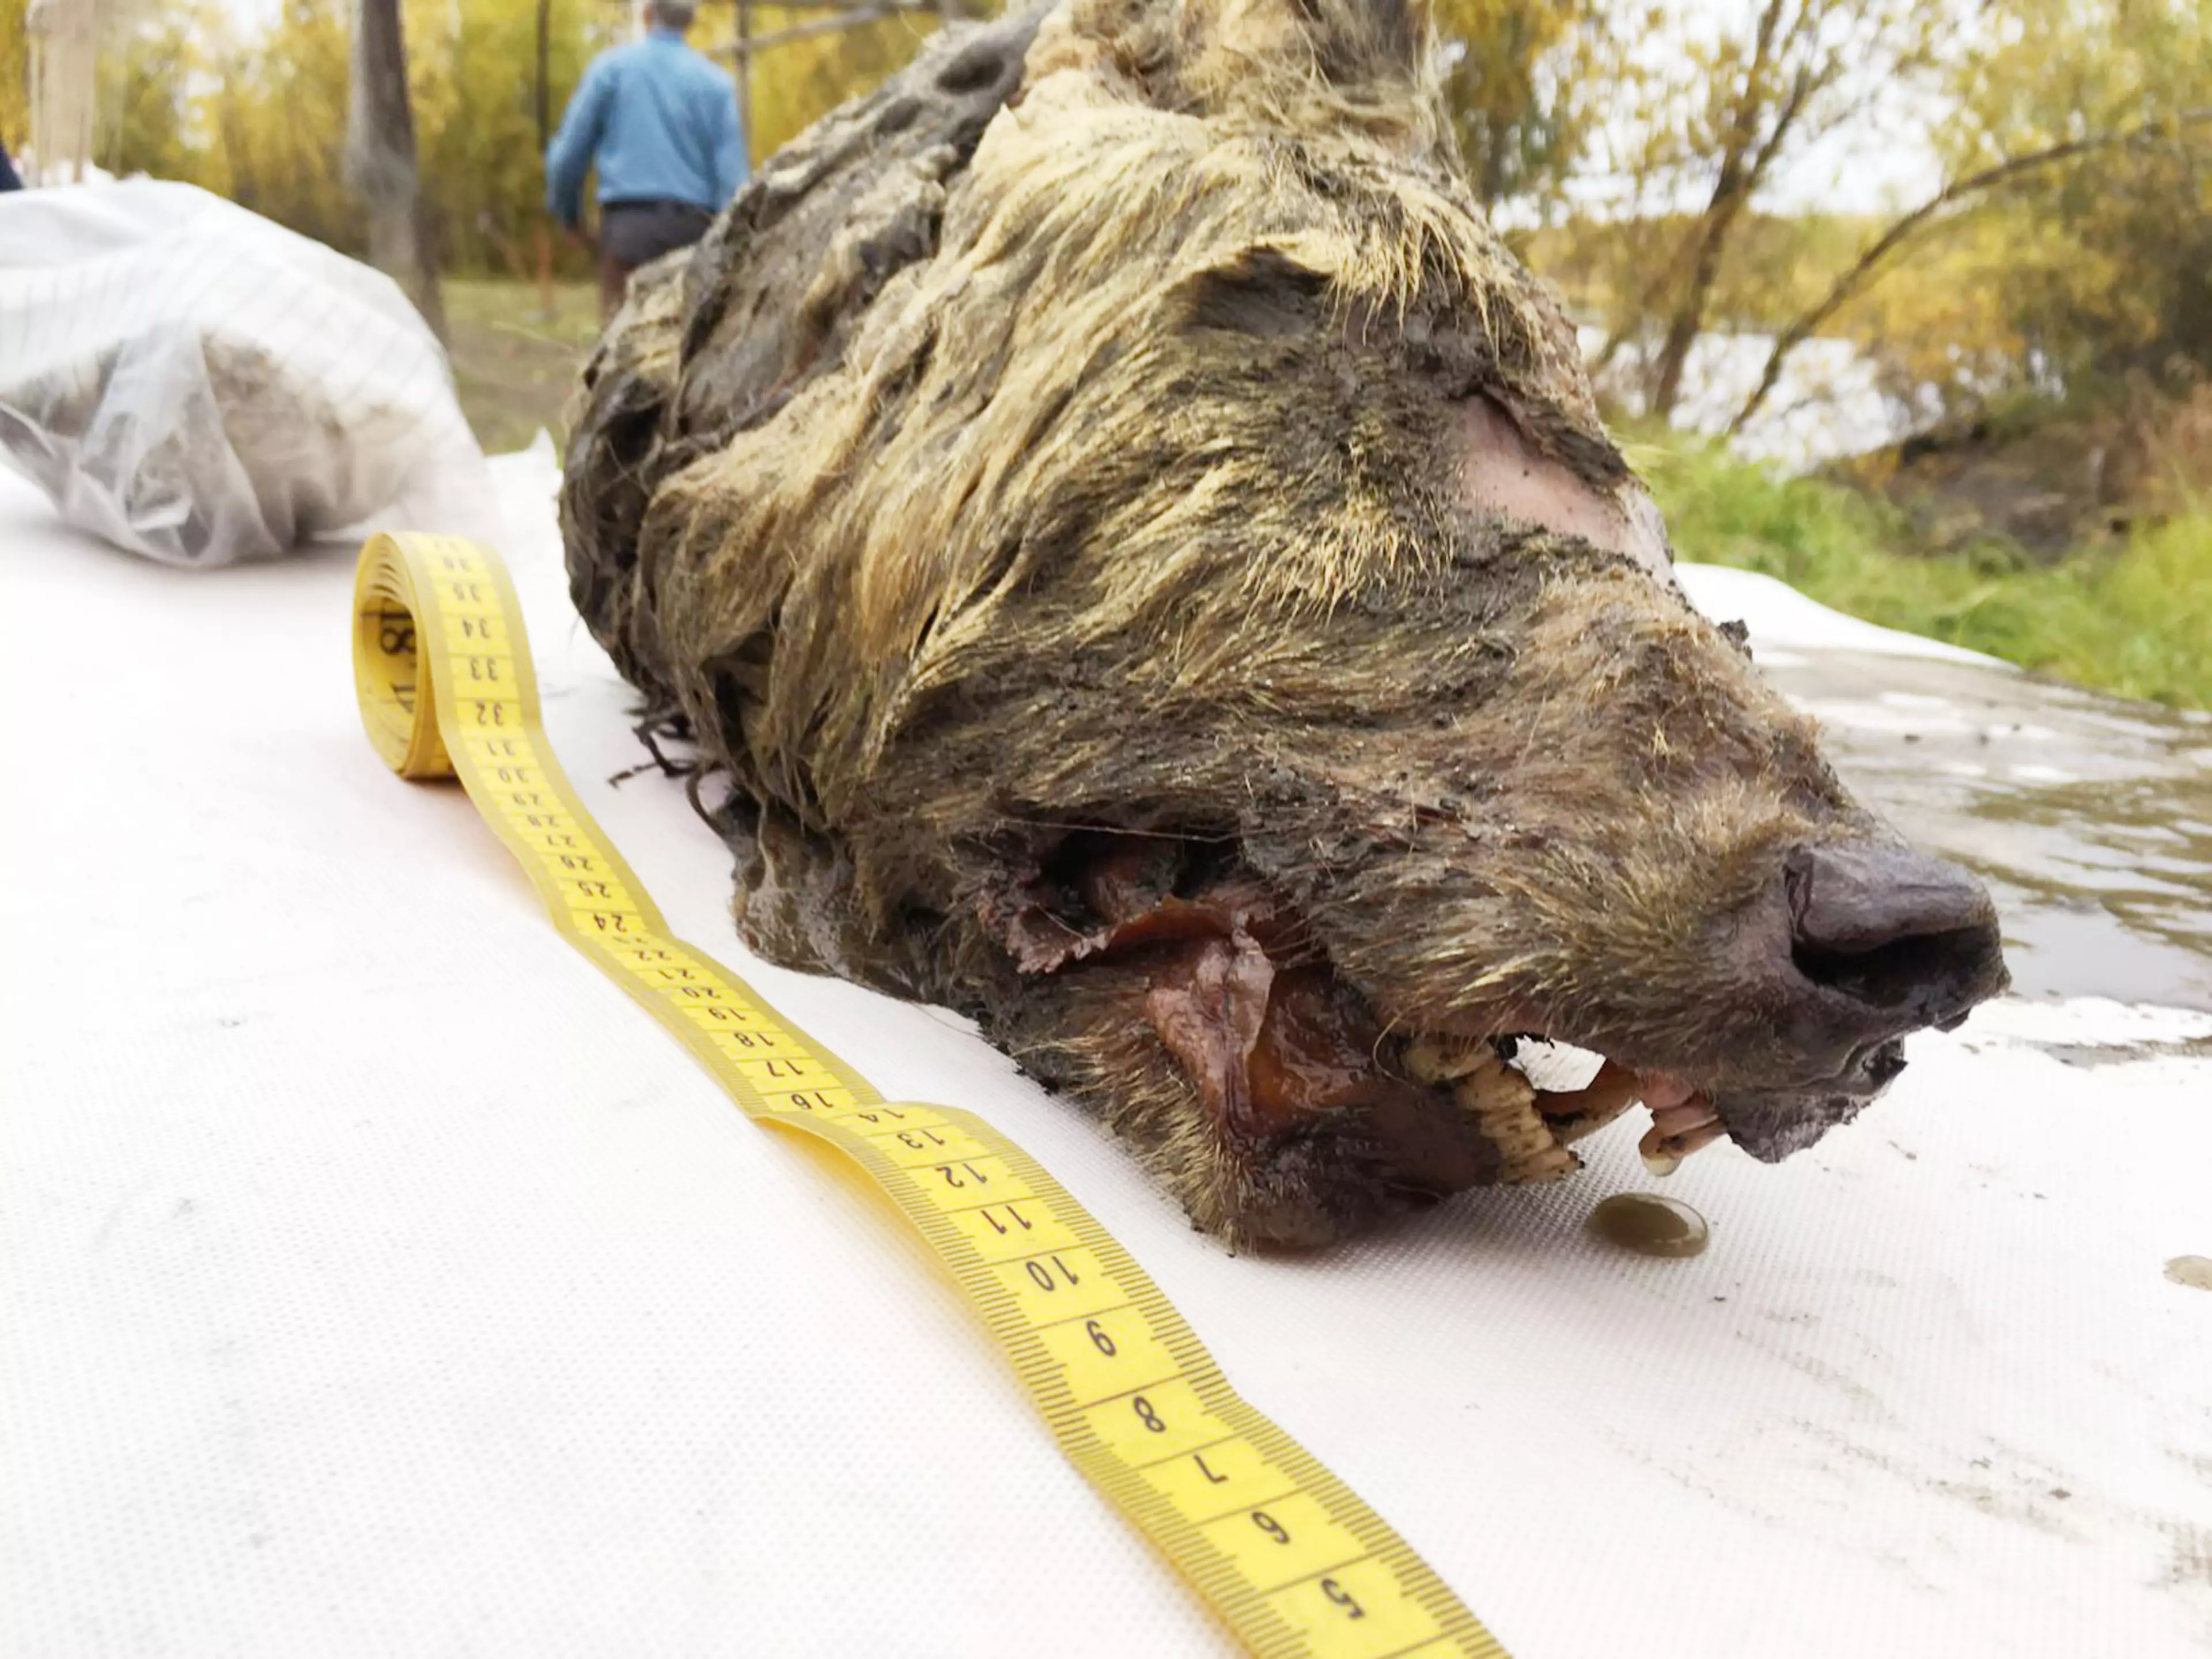 The 40,000-year-old creature was discovered in the Siberian permafrost.